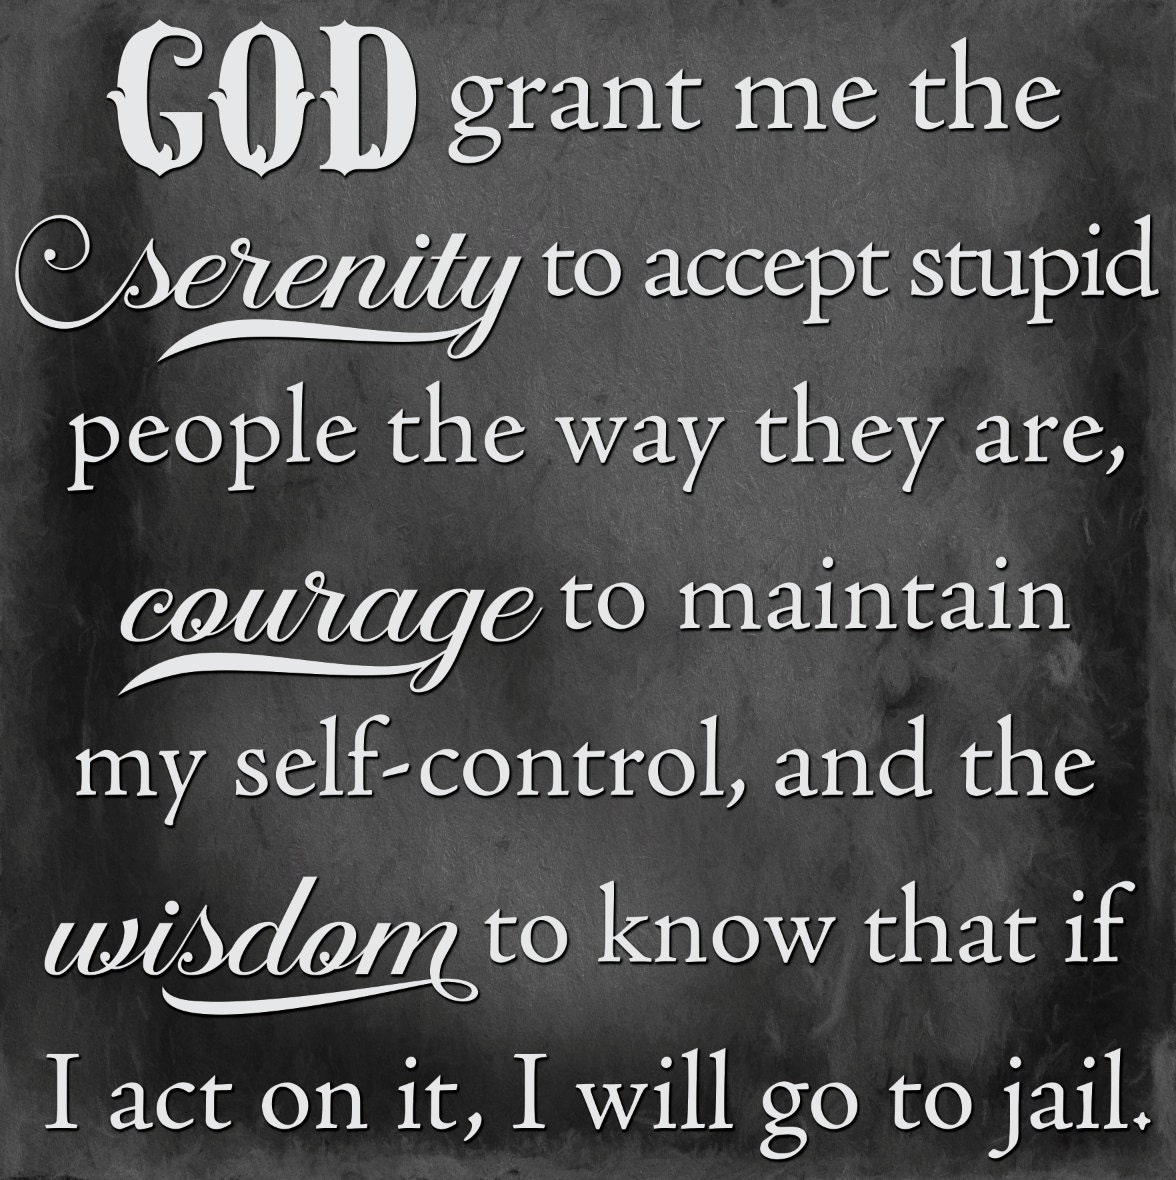 Stupid People Serenity Prayer Humorous sign SVG DFX PNG Eps Vinyl Silhouette Cameo Cricut Cutting Machine